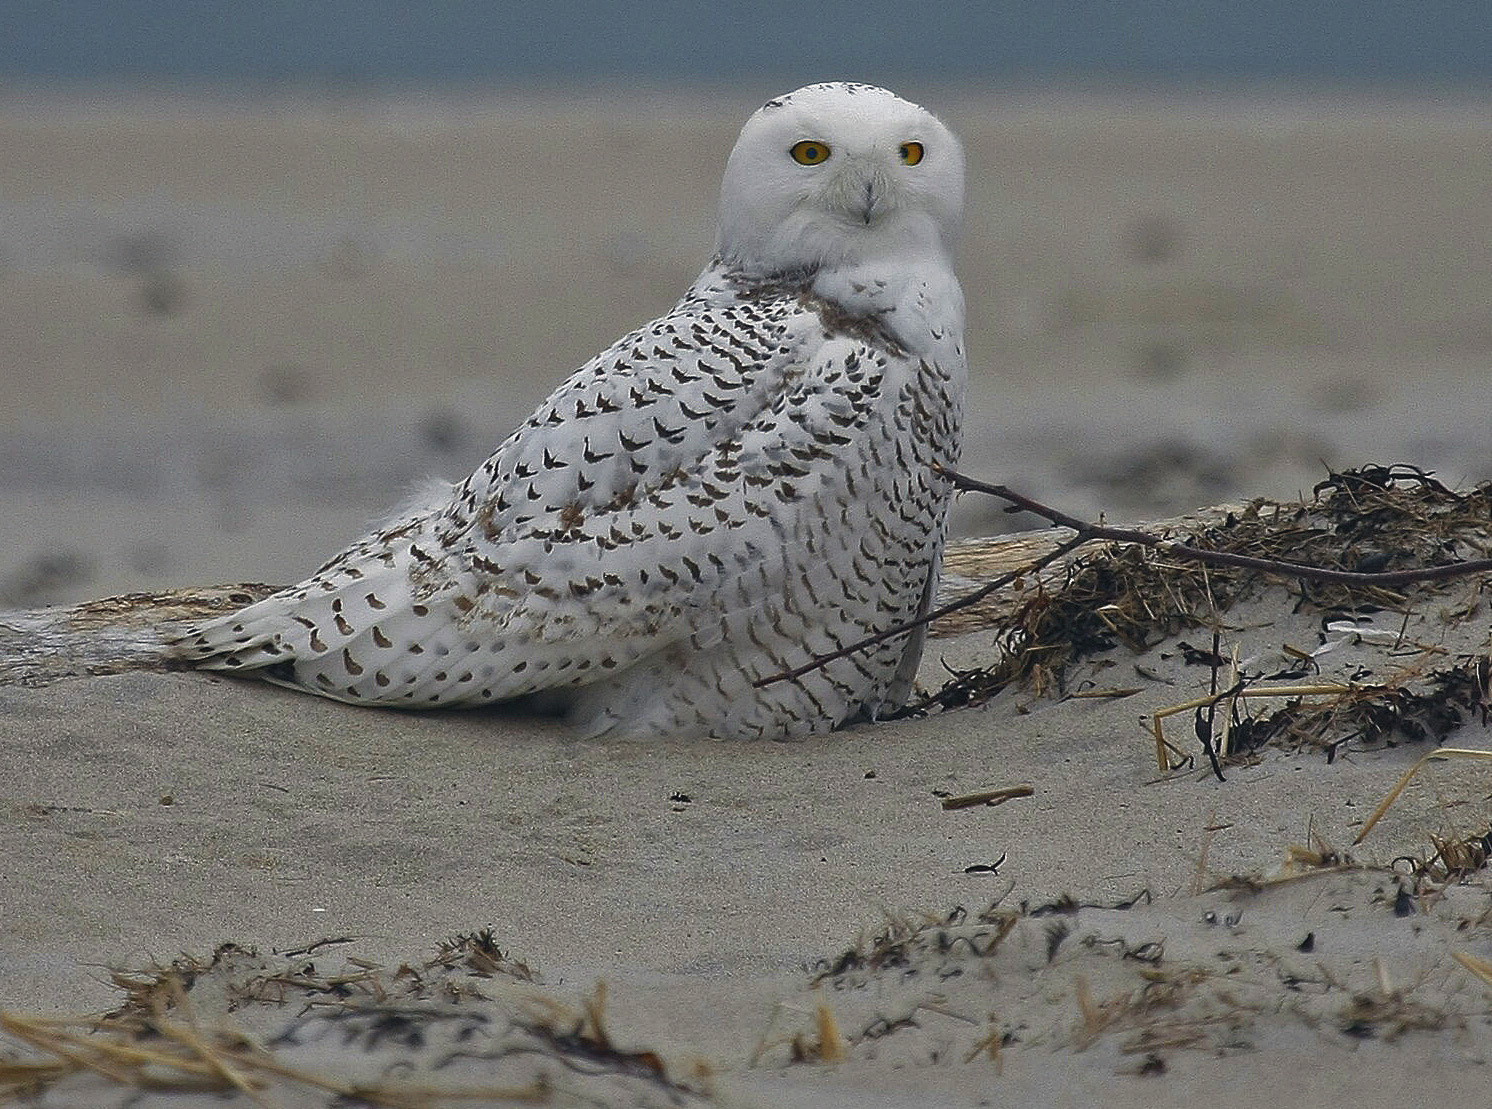 Artic Snow Owl (user submitted)